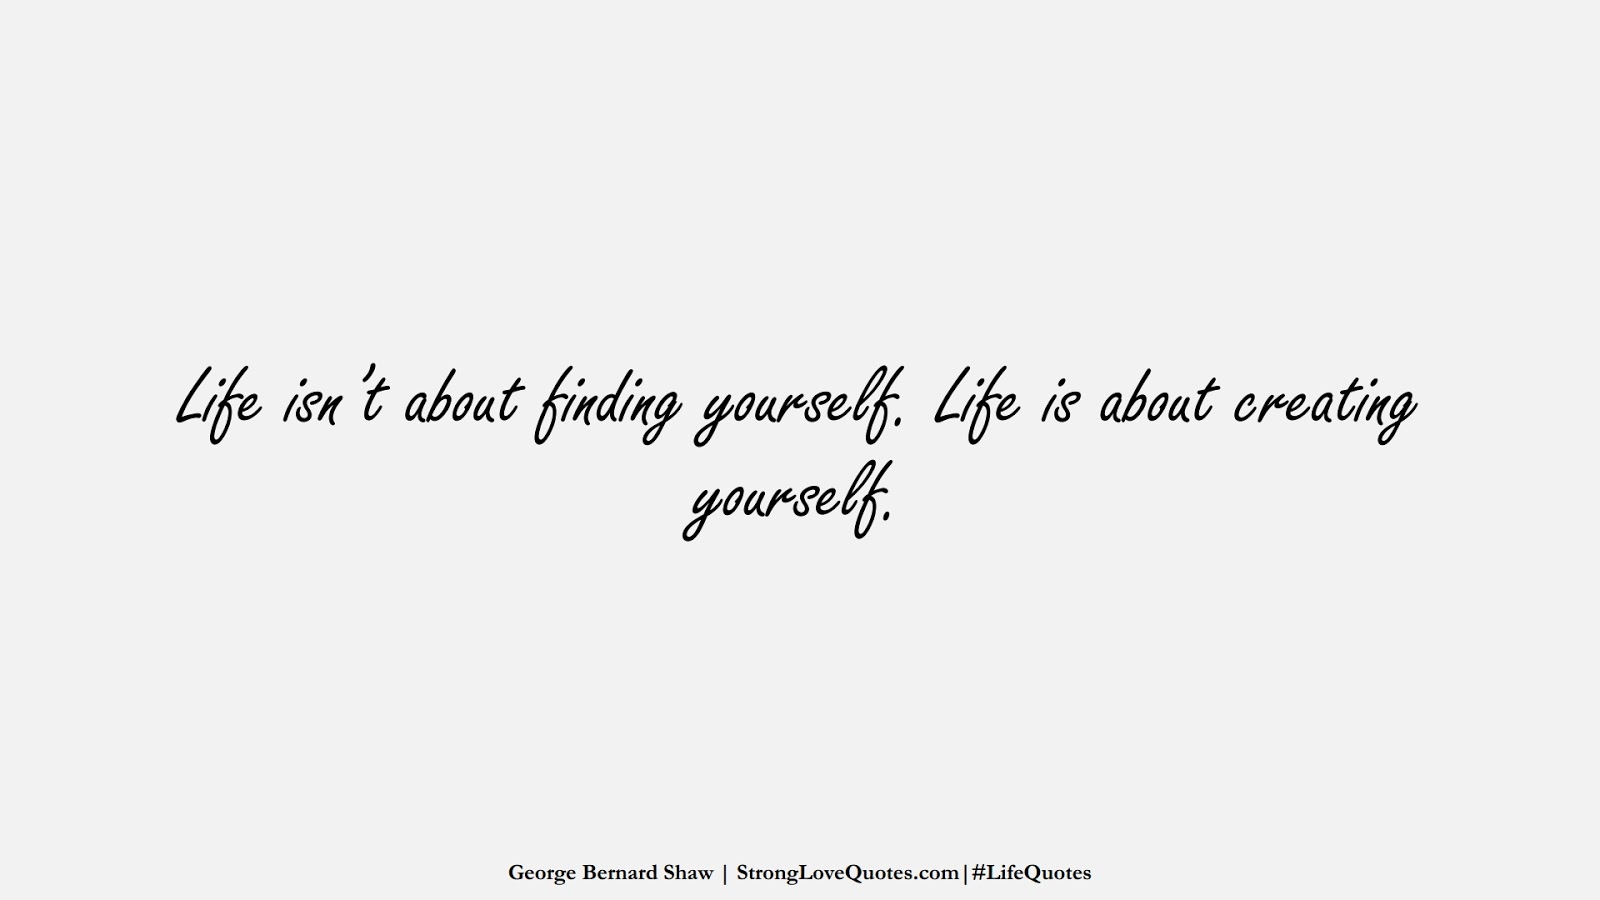 Life isn’t about finding yourself. Life is about creating yourself. (George Bernard Shaw);  #LifeQuotes